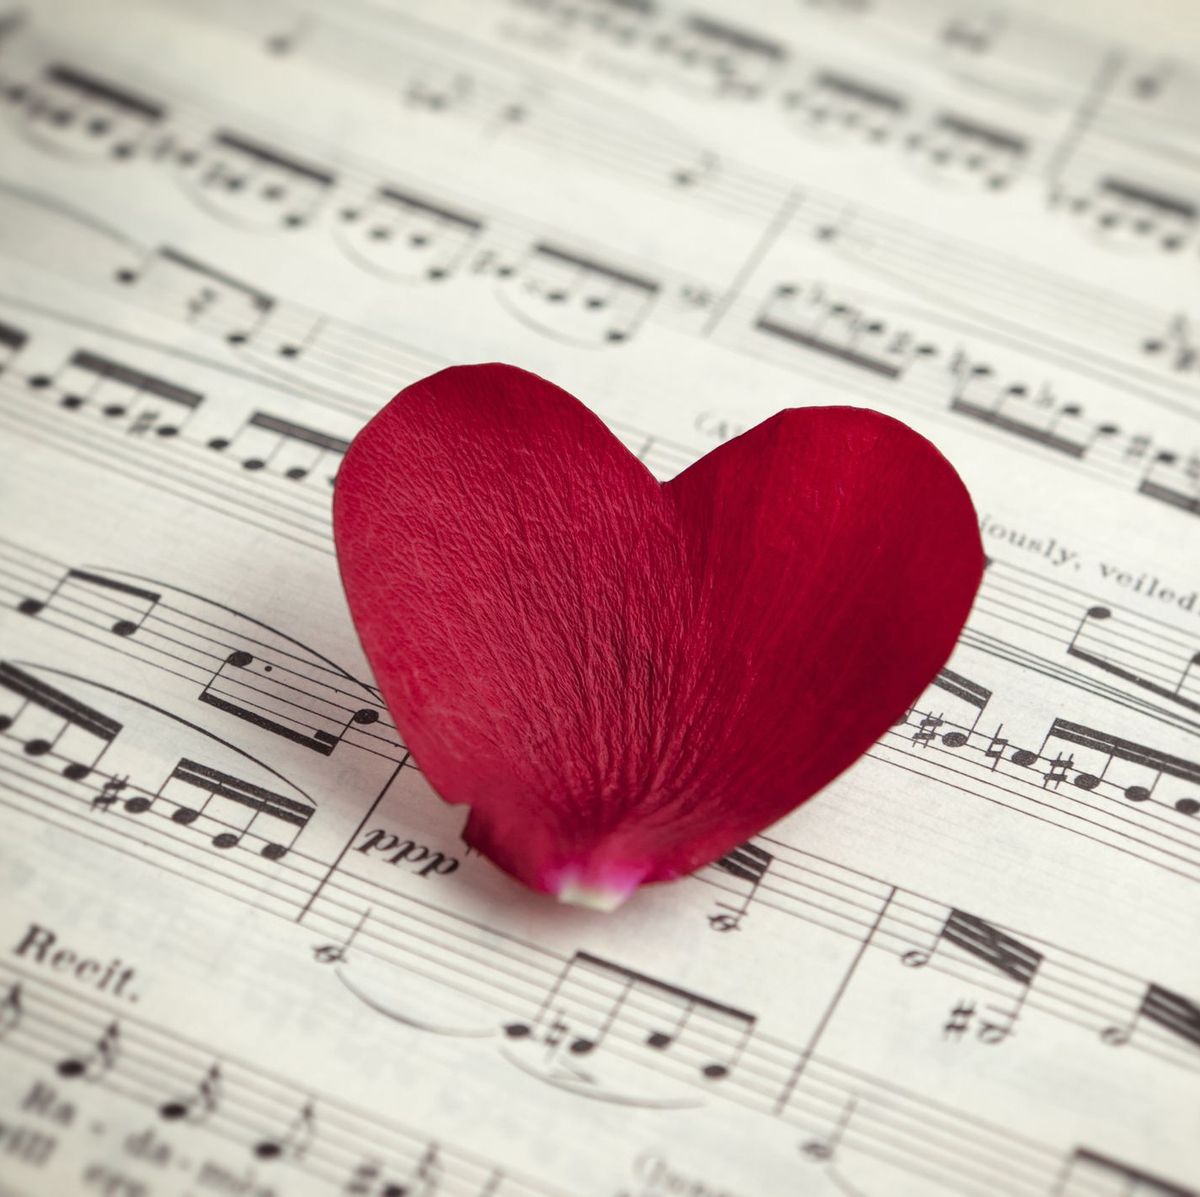 39 Best Classic Valentine's Day Songs of All Time - Top Romantic ...